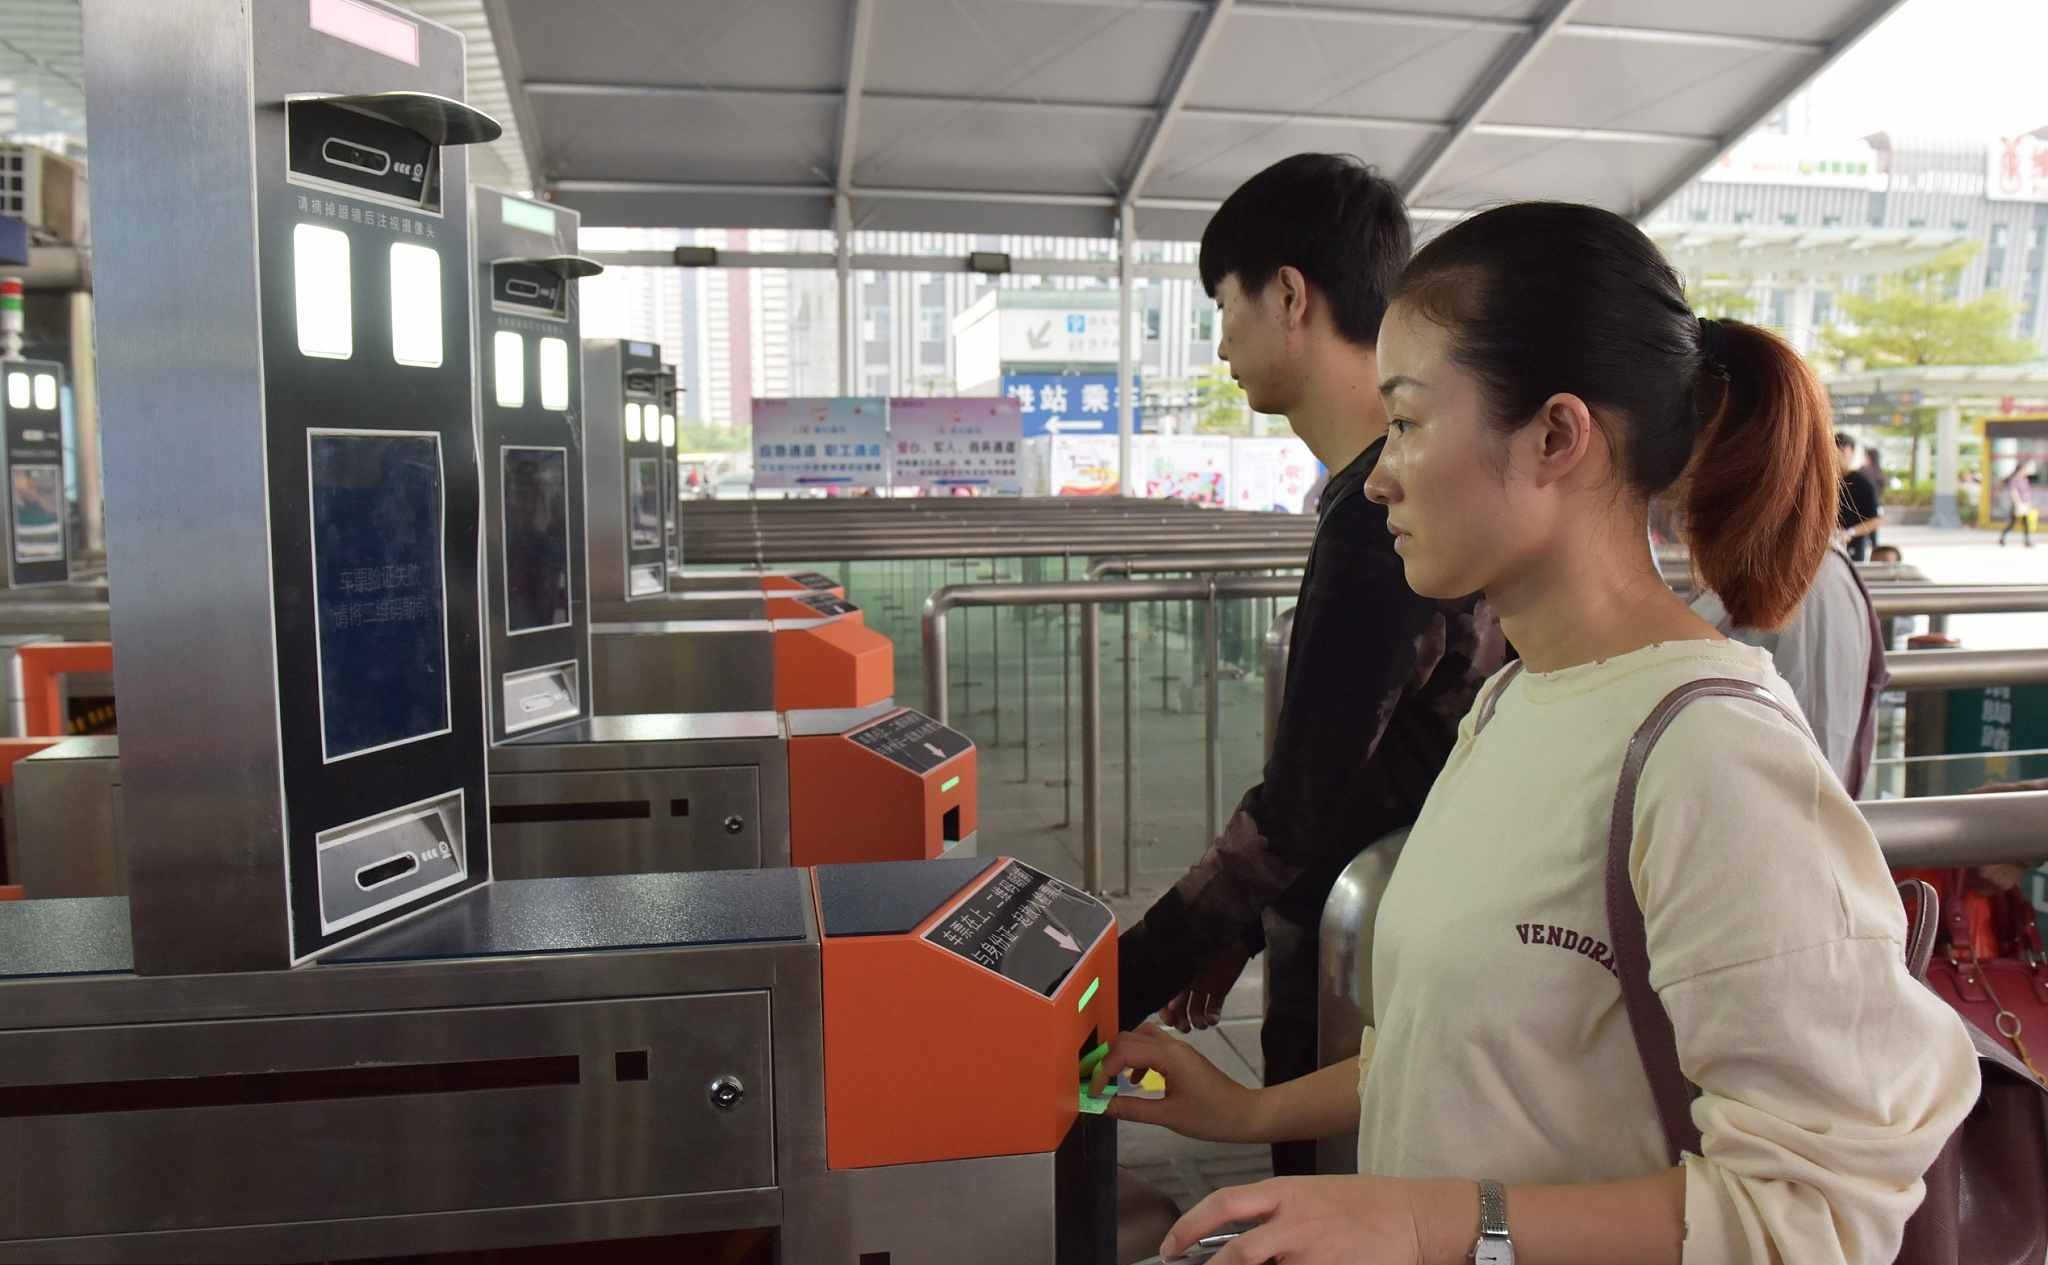 Passengers are identified by facial recognition system by swiping ID cards at Shenzhen North Railway Station